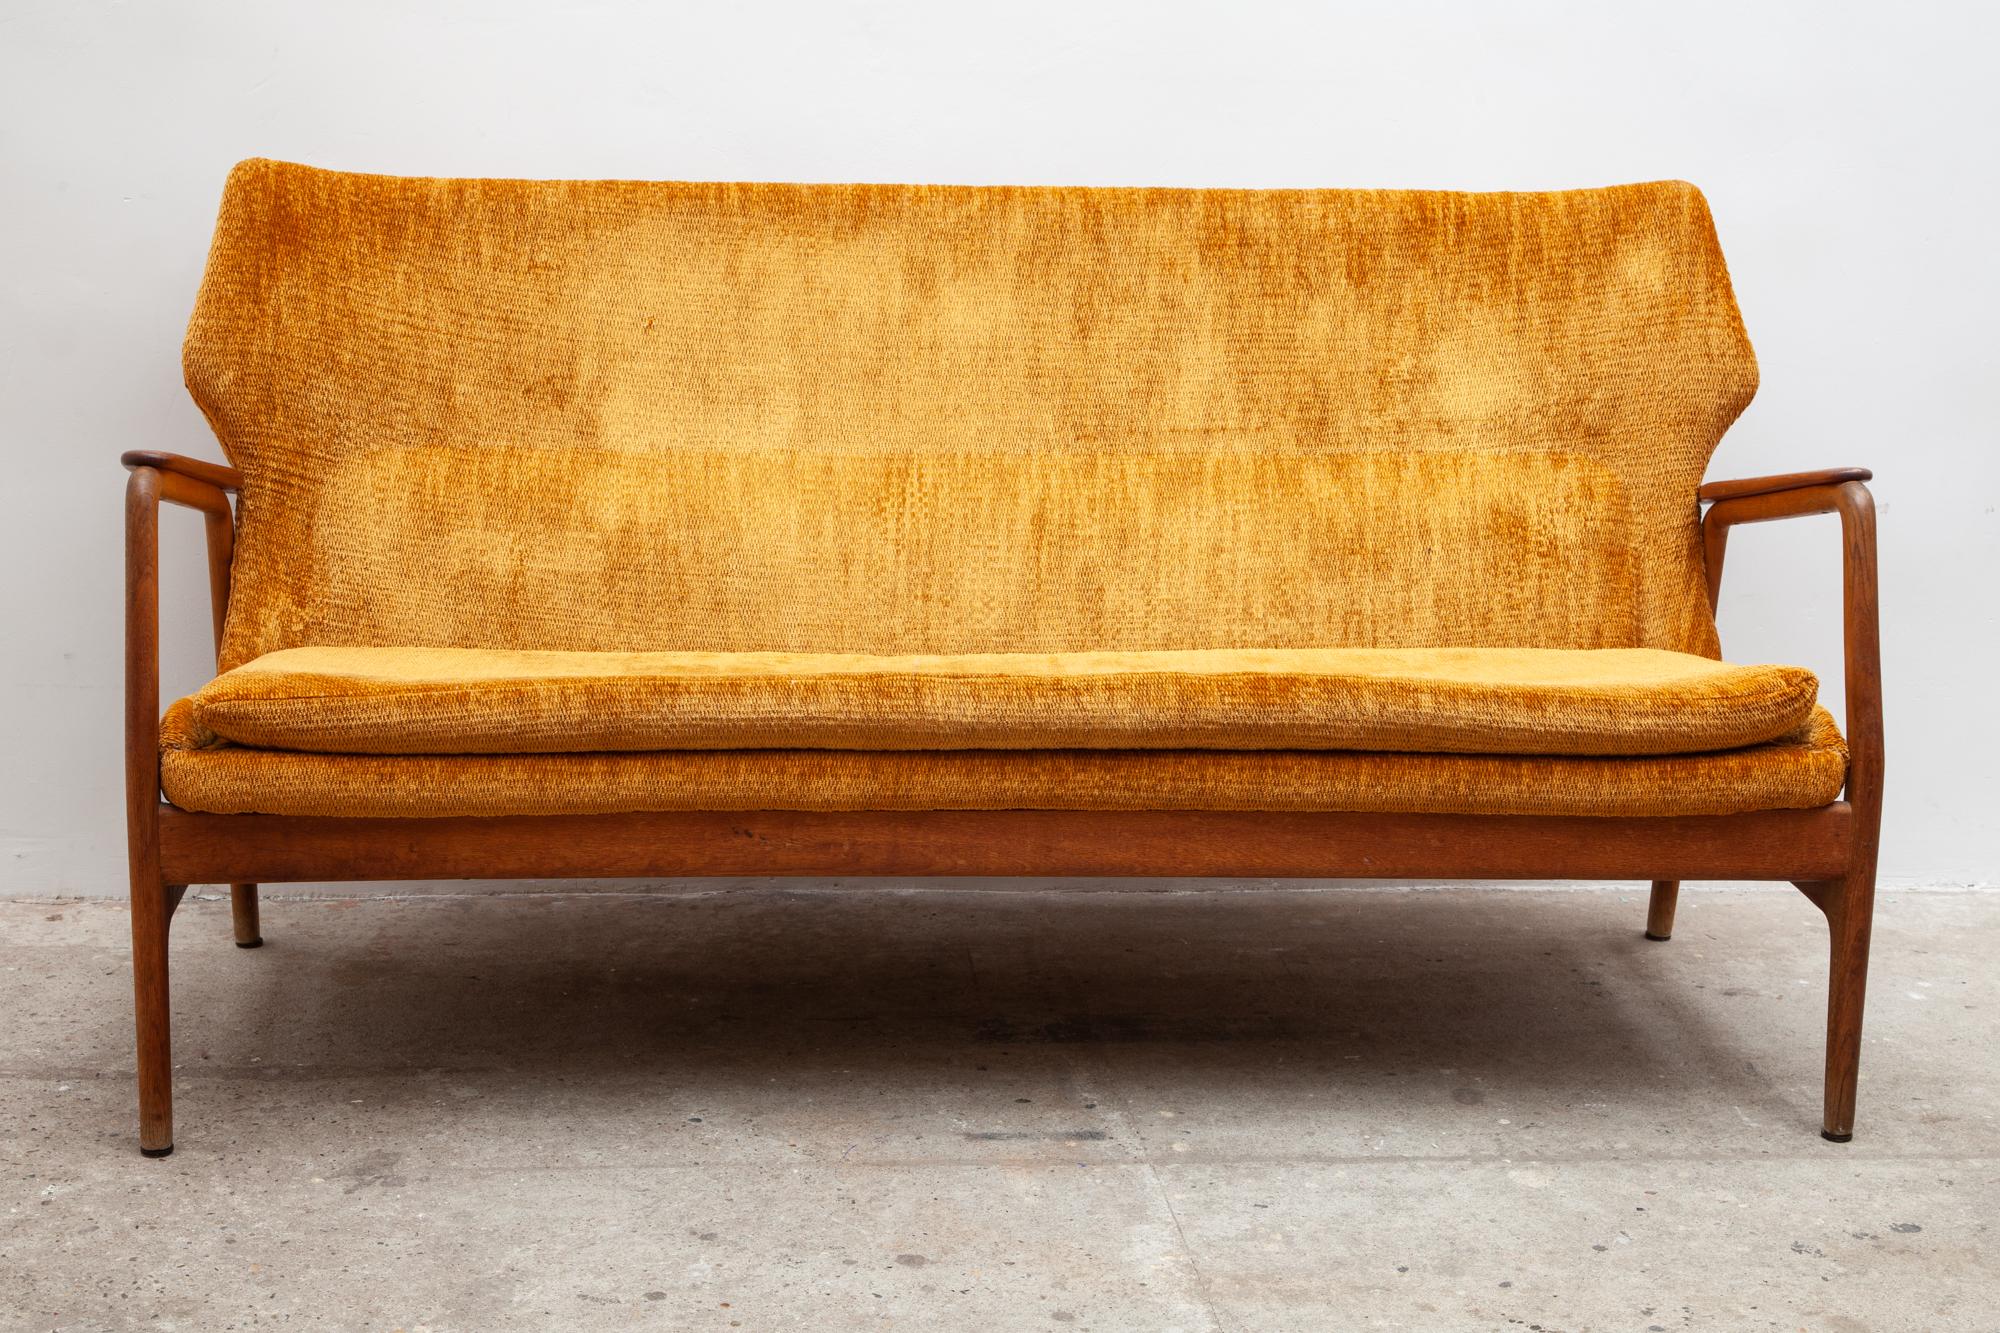 Early rare midcentury livingroom set composed of one lady-chair, one highback reading chair, attached neck pillow, and one sofa.
Beautifully sculpted teak frame and original amber-orange bouclé reupholstered. Timeless Danish style design.

Sofa: